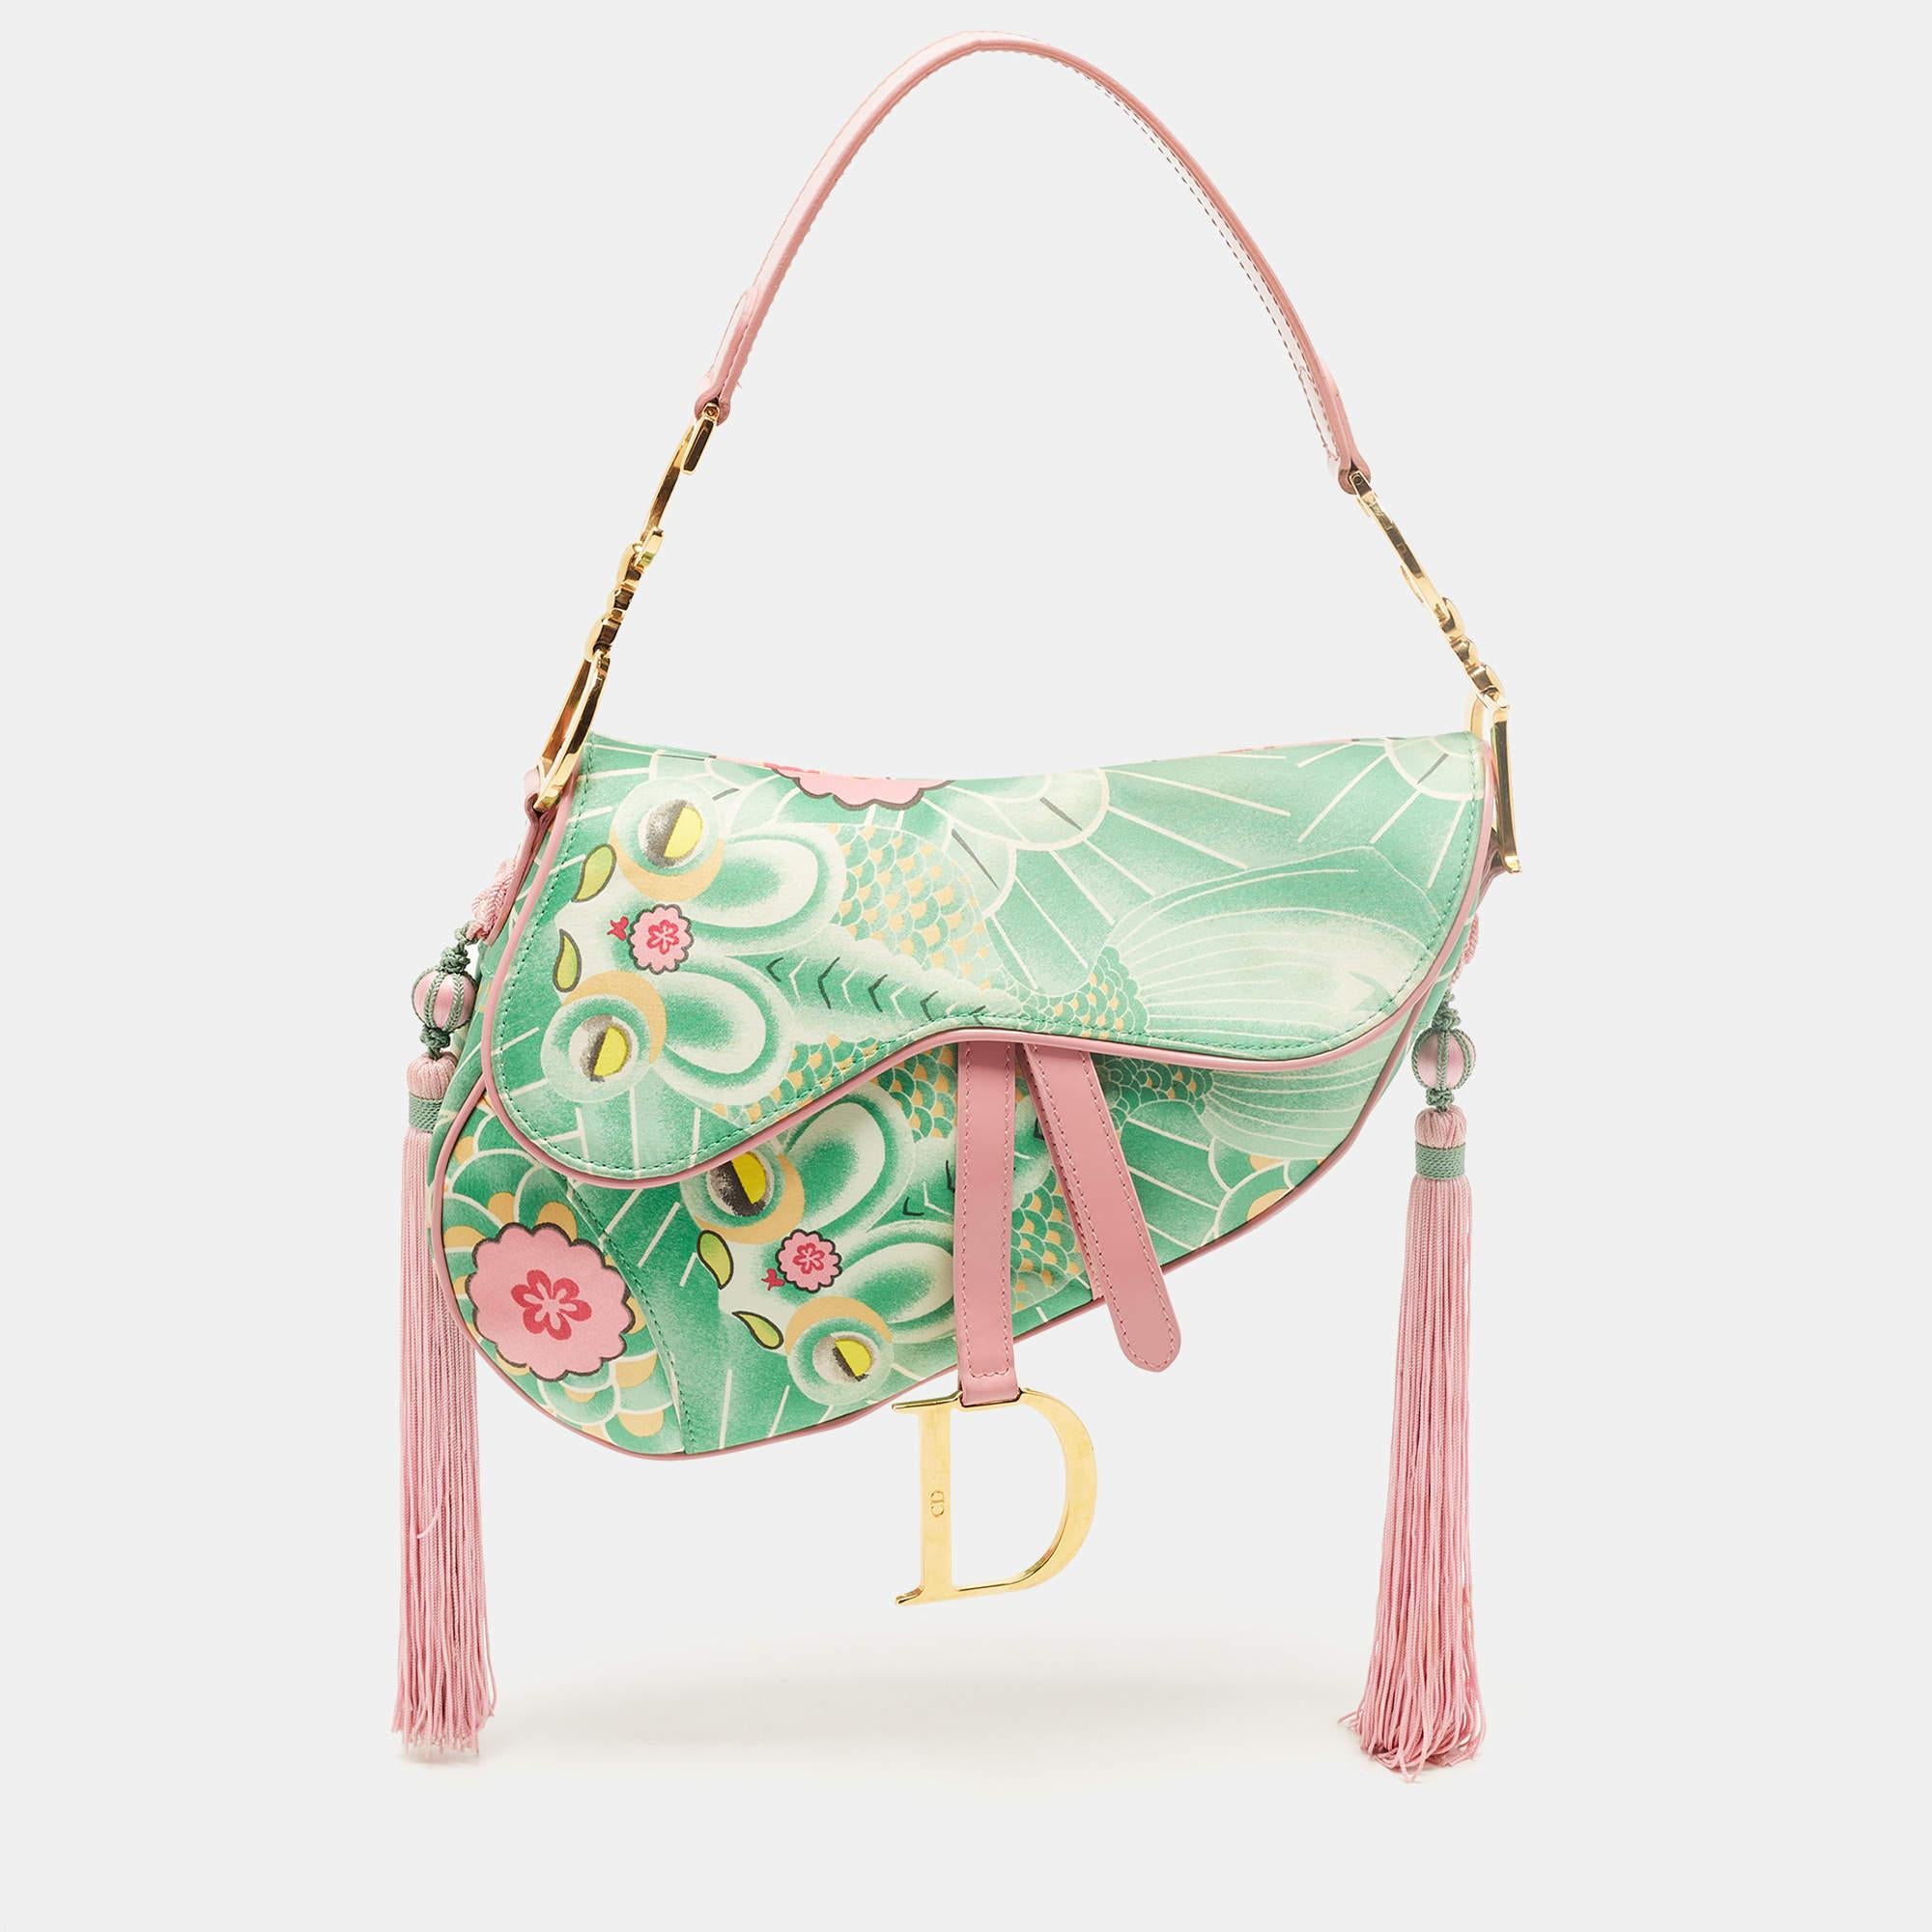 Women's Dior Pink/Green Printed Satin and Glazed Leather Limited Edition 0705 Saddle Bag